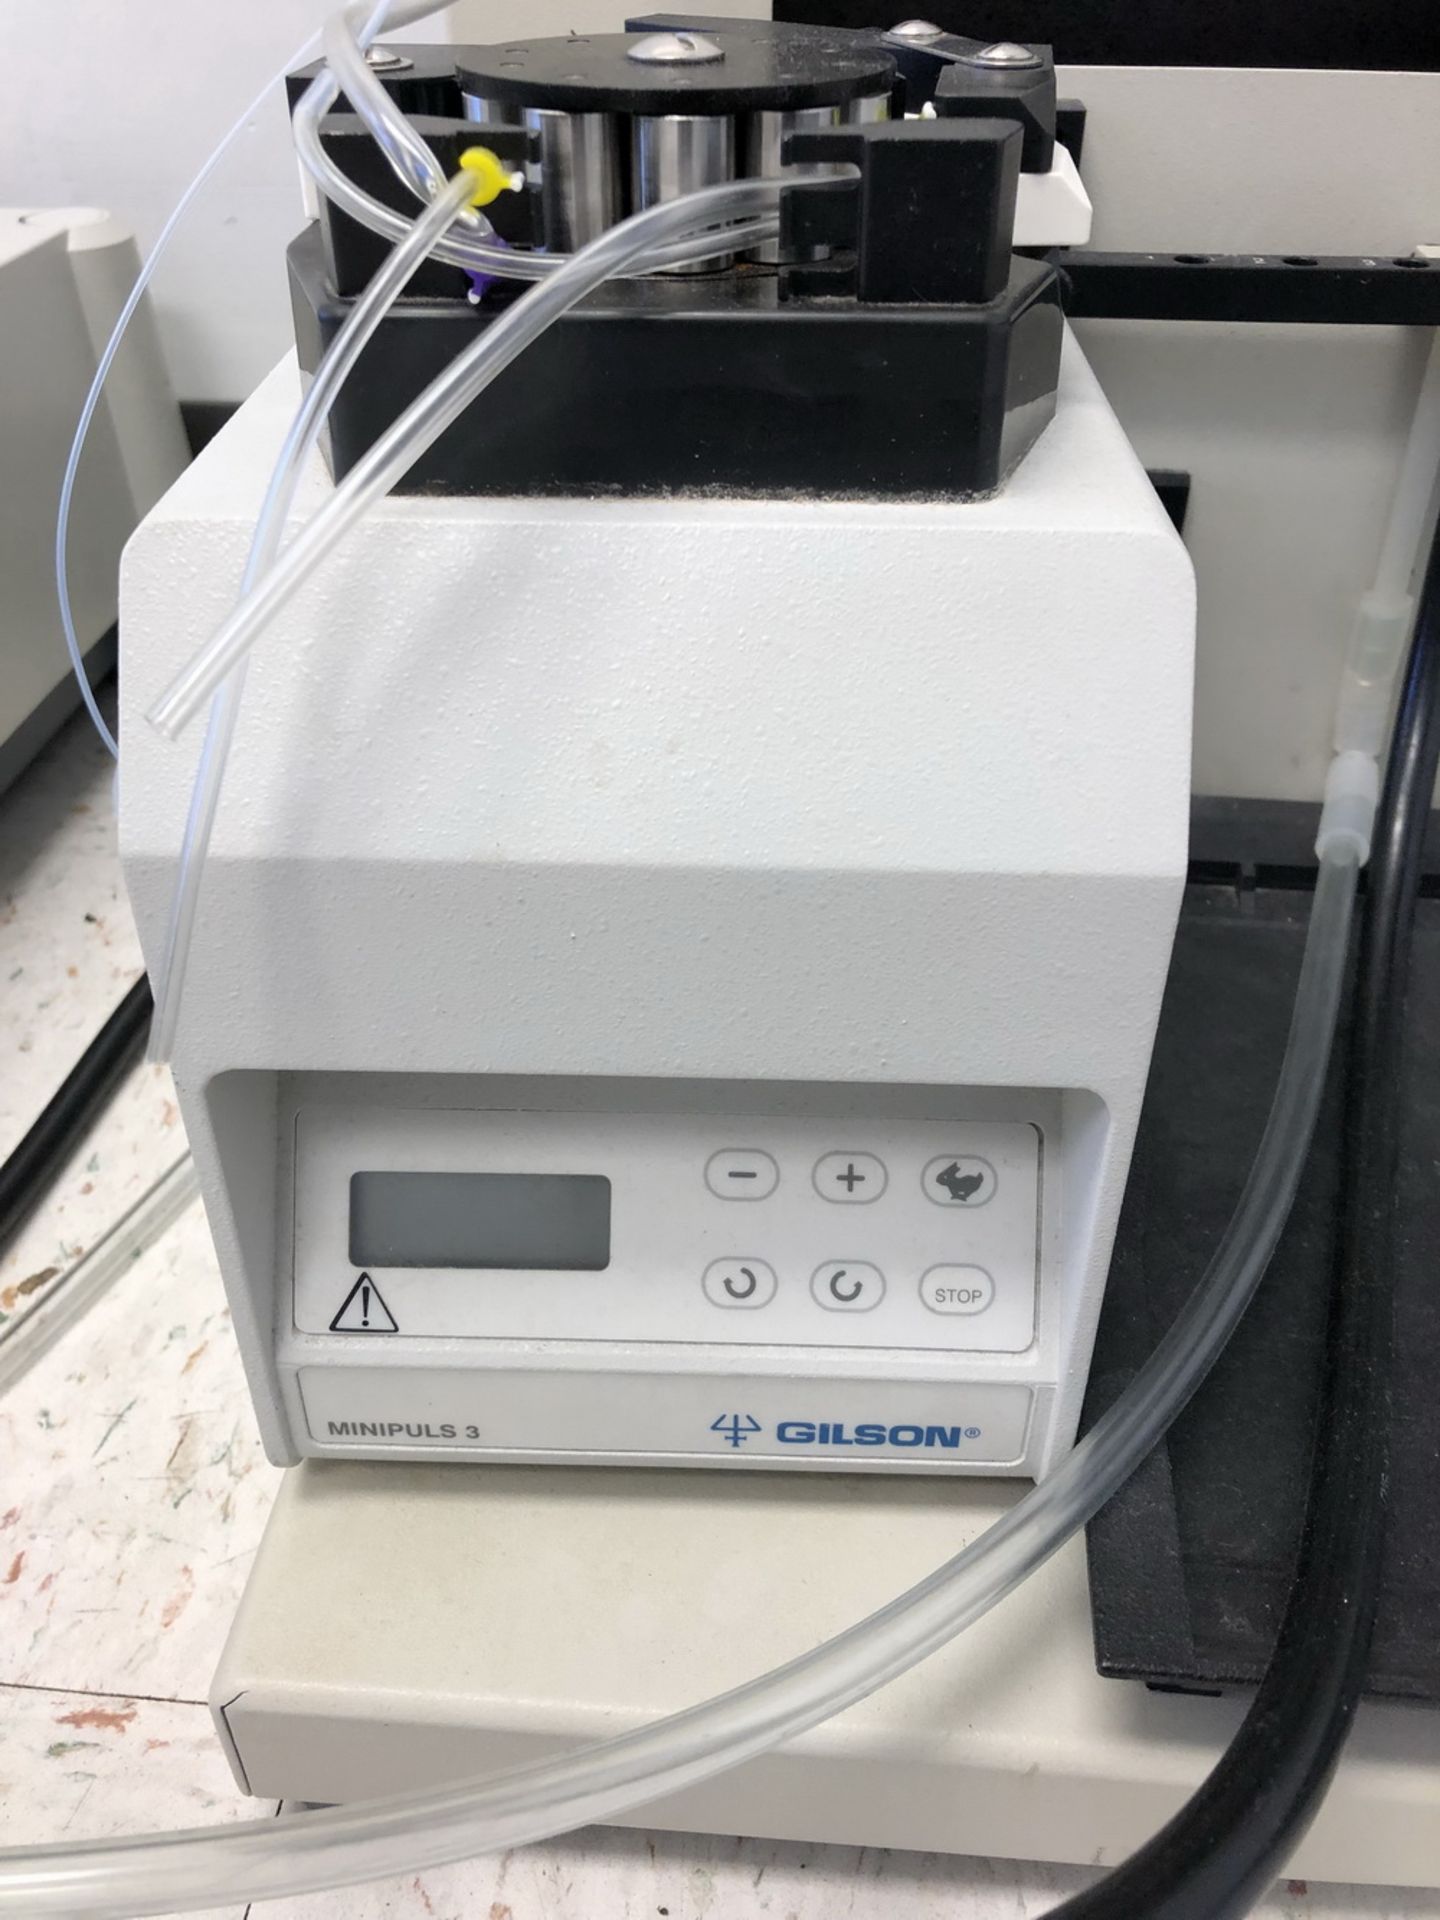 Gilson 223 Sample Changer with Gilson Minipuls3 Peristaltic Pump - Image 2 of 3